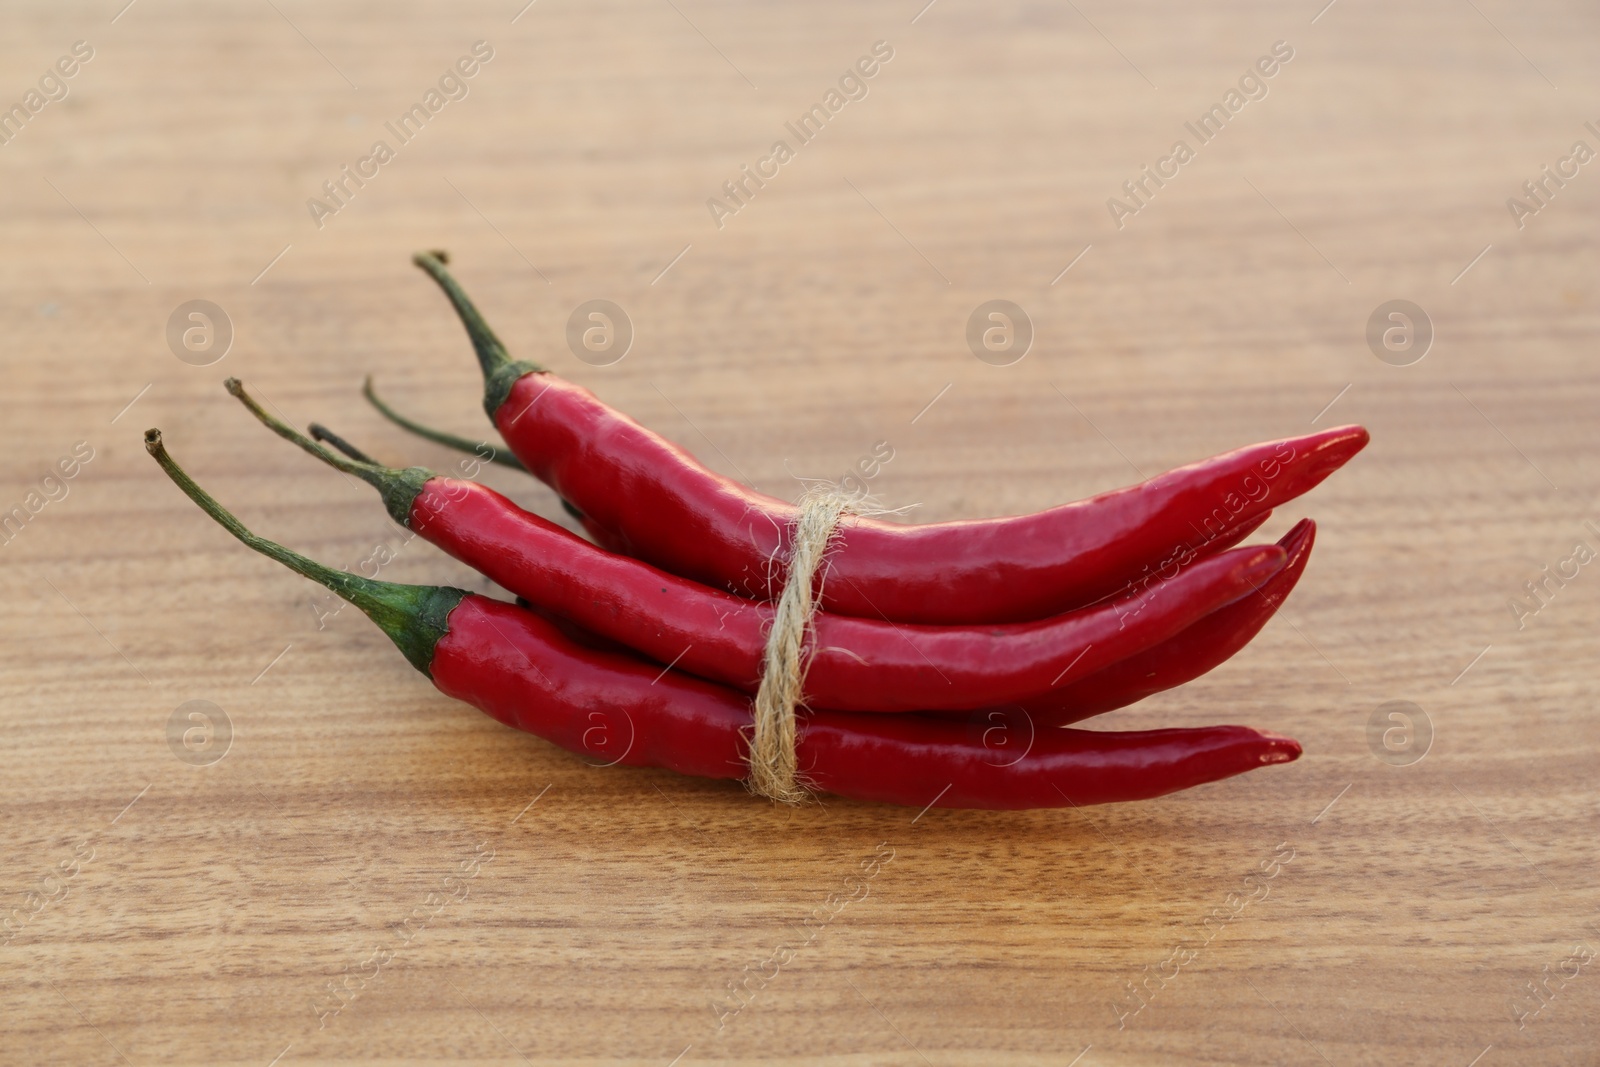 Photo of Red ripe chili peppers on wooden table